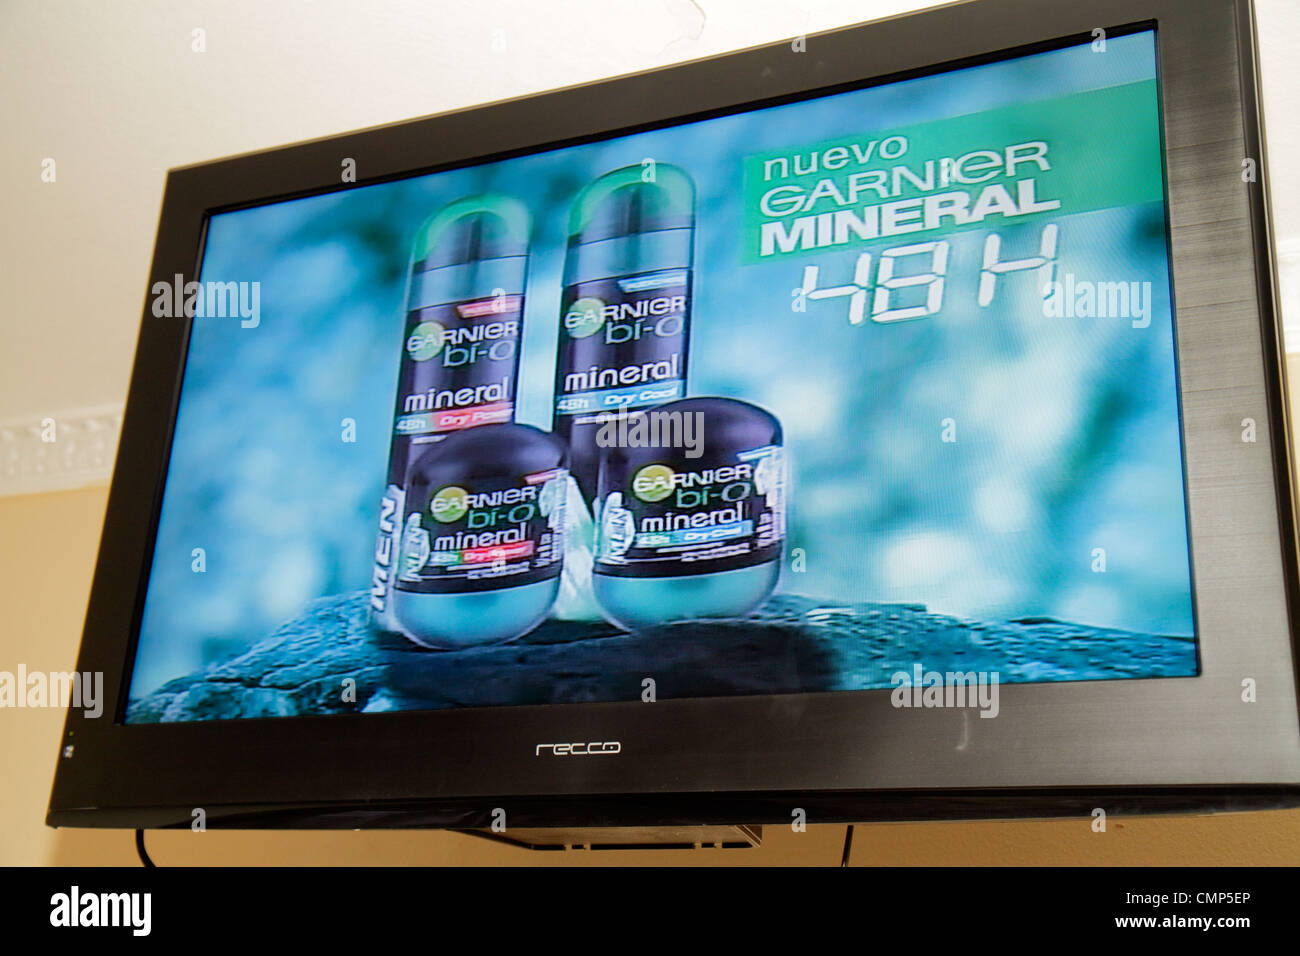 Santiago Chile,television,set,TV,flat screen,ad advertising  advertisement,commercial,Spanish  language,bilingual,text,image,Garnier,Mineral,deodorant,a Stock Photo -  Alamy